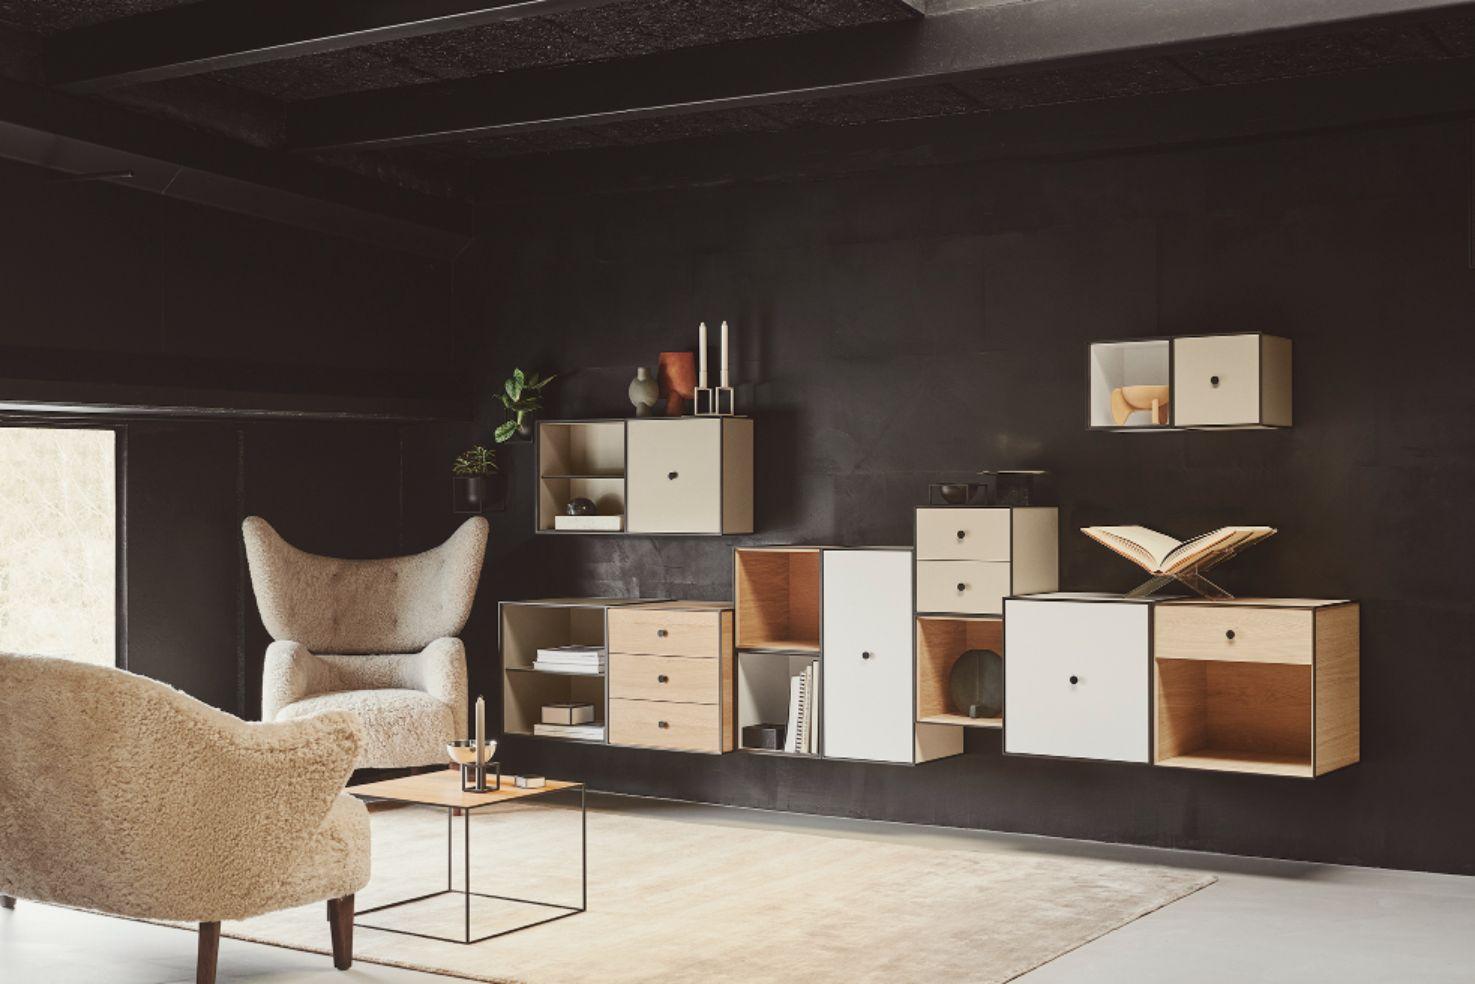 28 oak frame box by Lassen
Dimensions: W 28 x D 28 x H 28 cm 
Materials: Finér,melamin, melamin, melamine, metal, veneer, oak, brass.
Also available in different colors and dimensions. 

Frame 28 is a flexible storage solution consisting of a